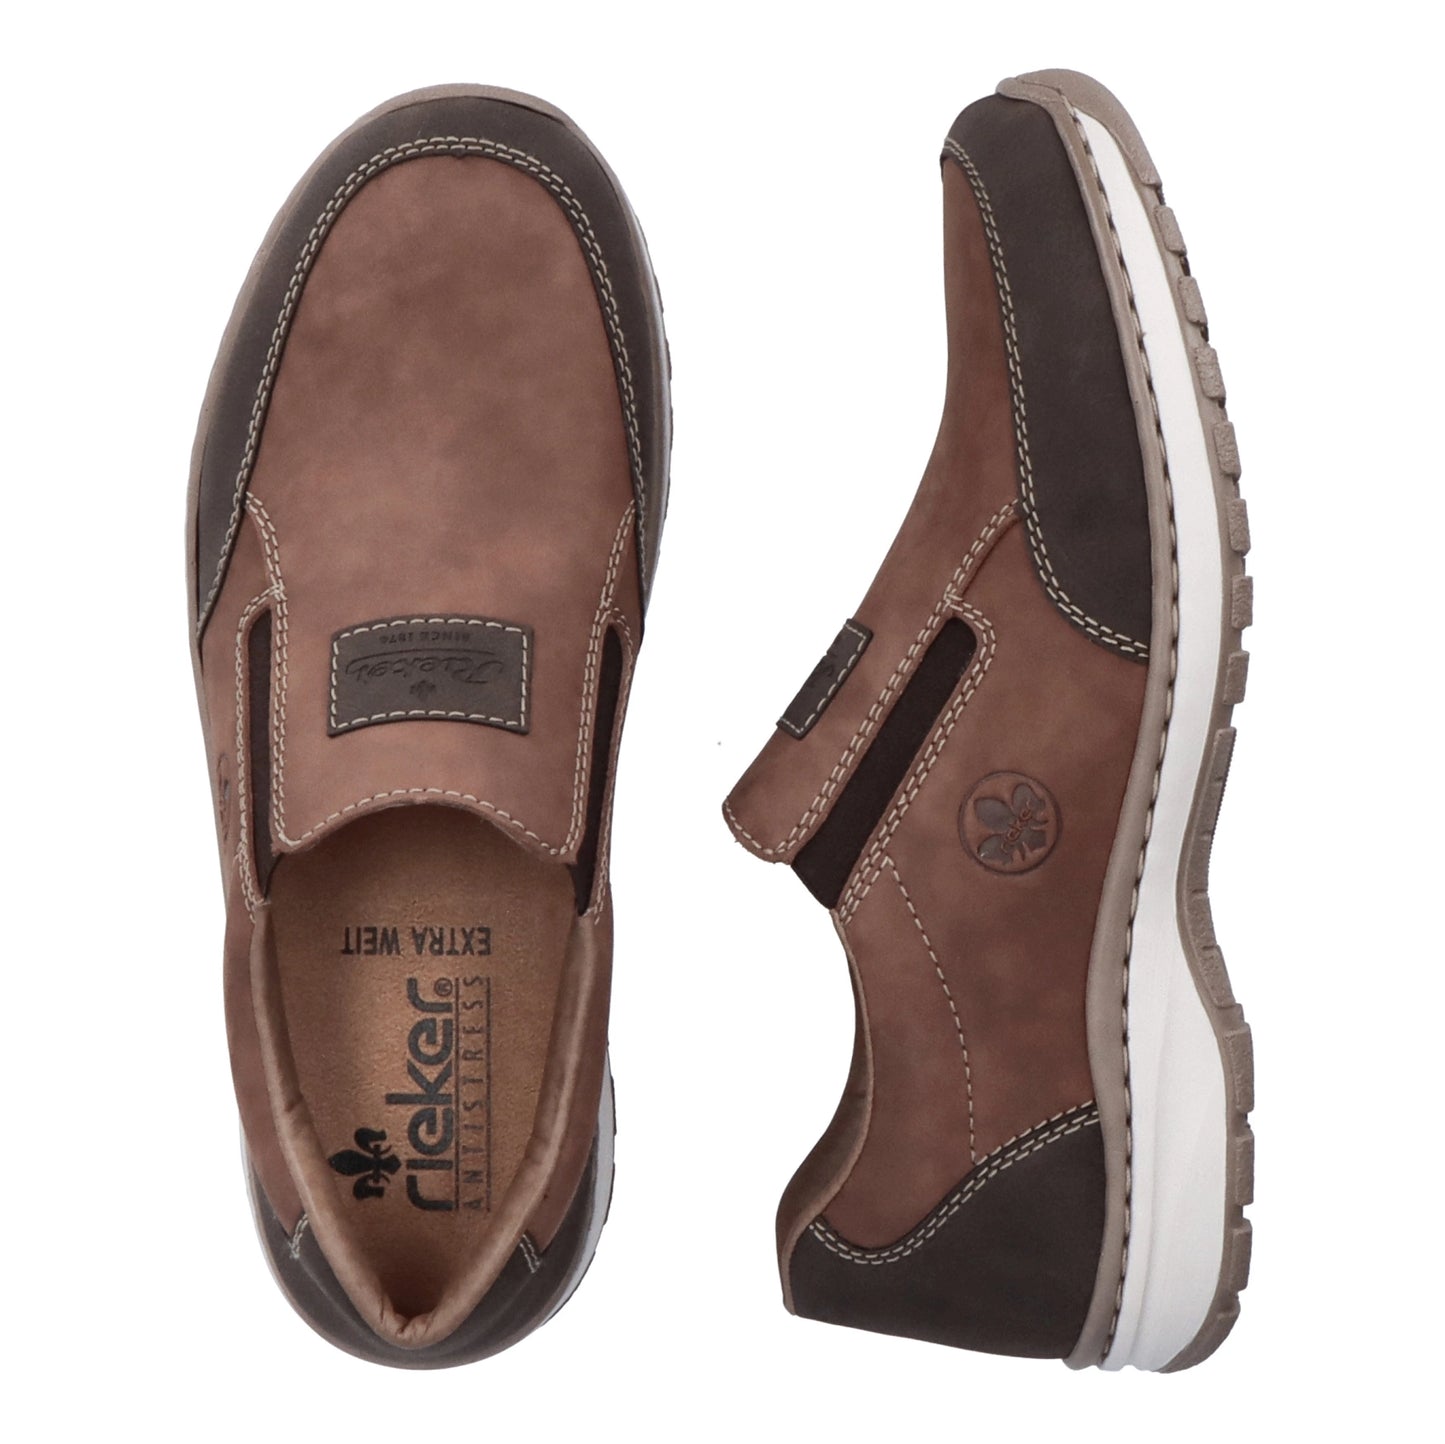 Rieker 03354-24 Tan Brown Extra Wide Slip On Shoes